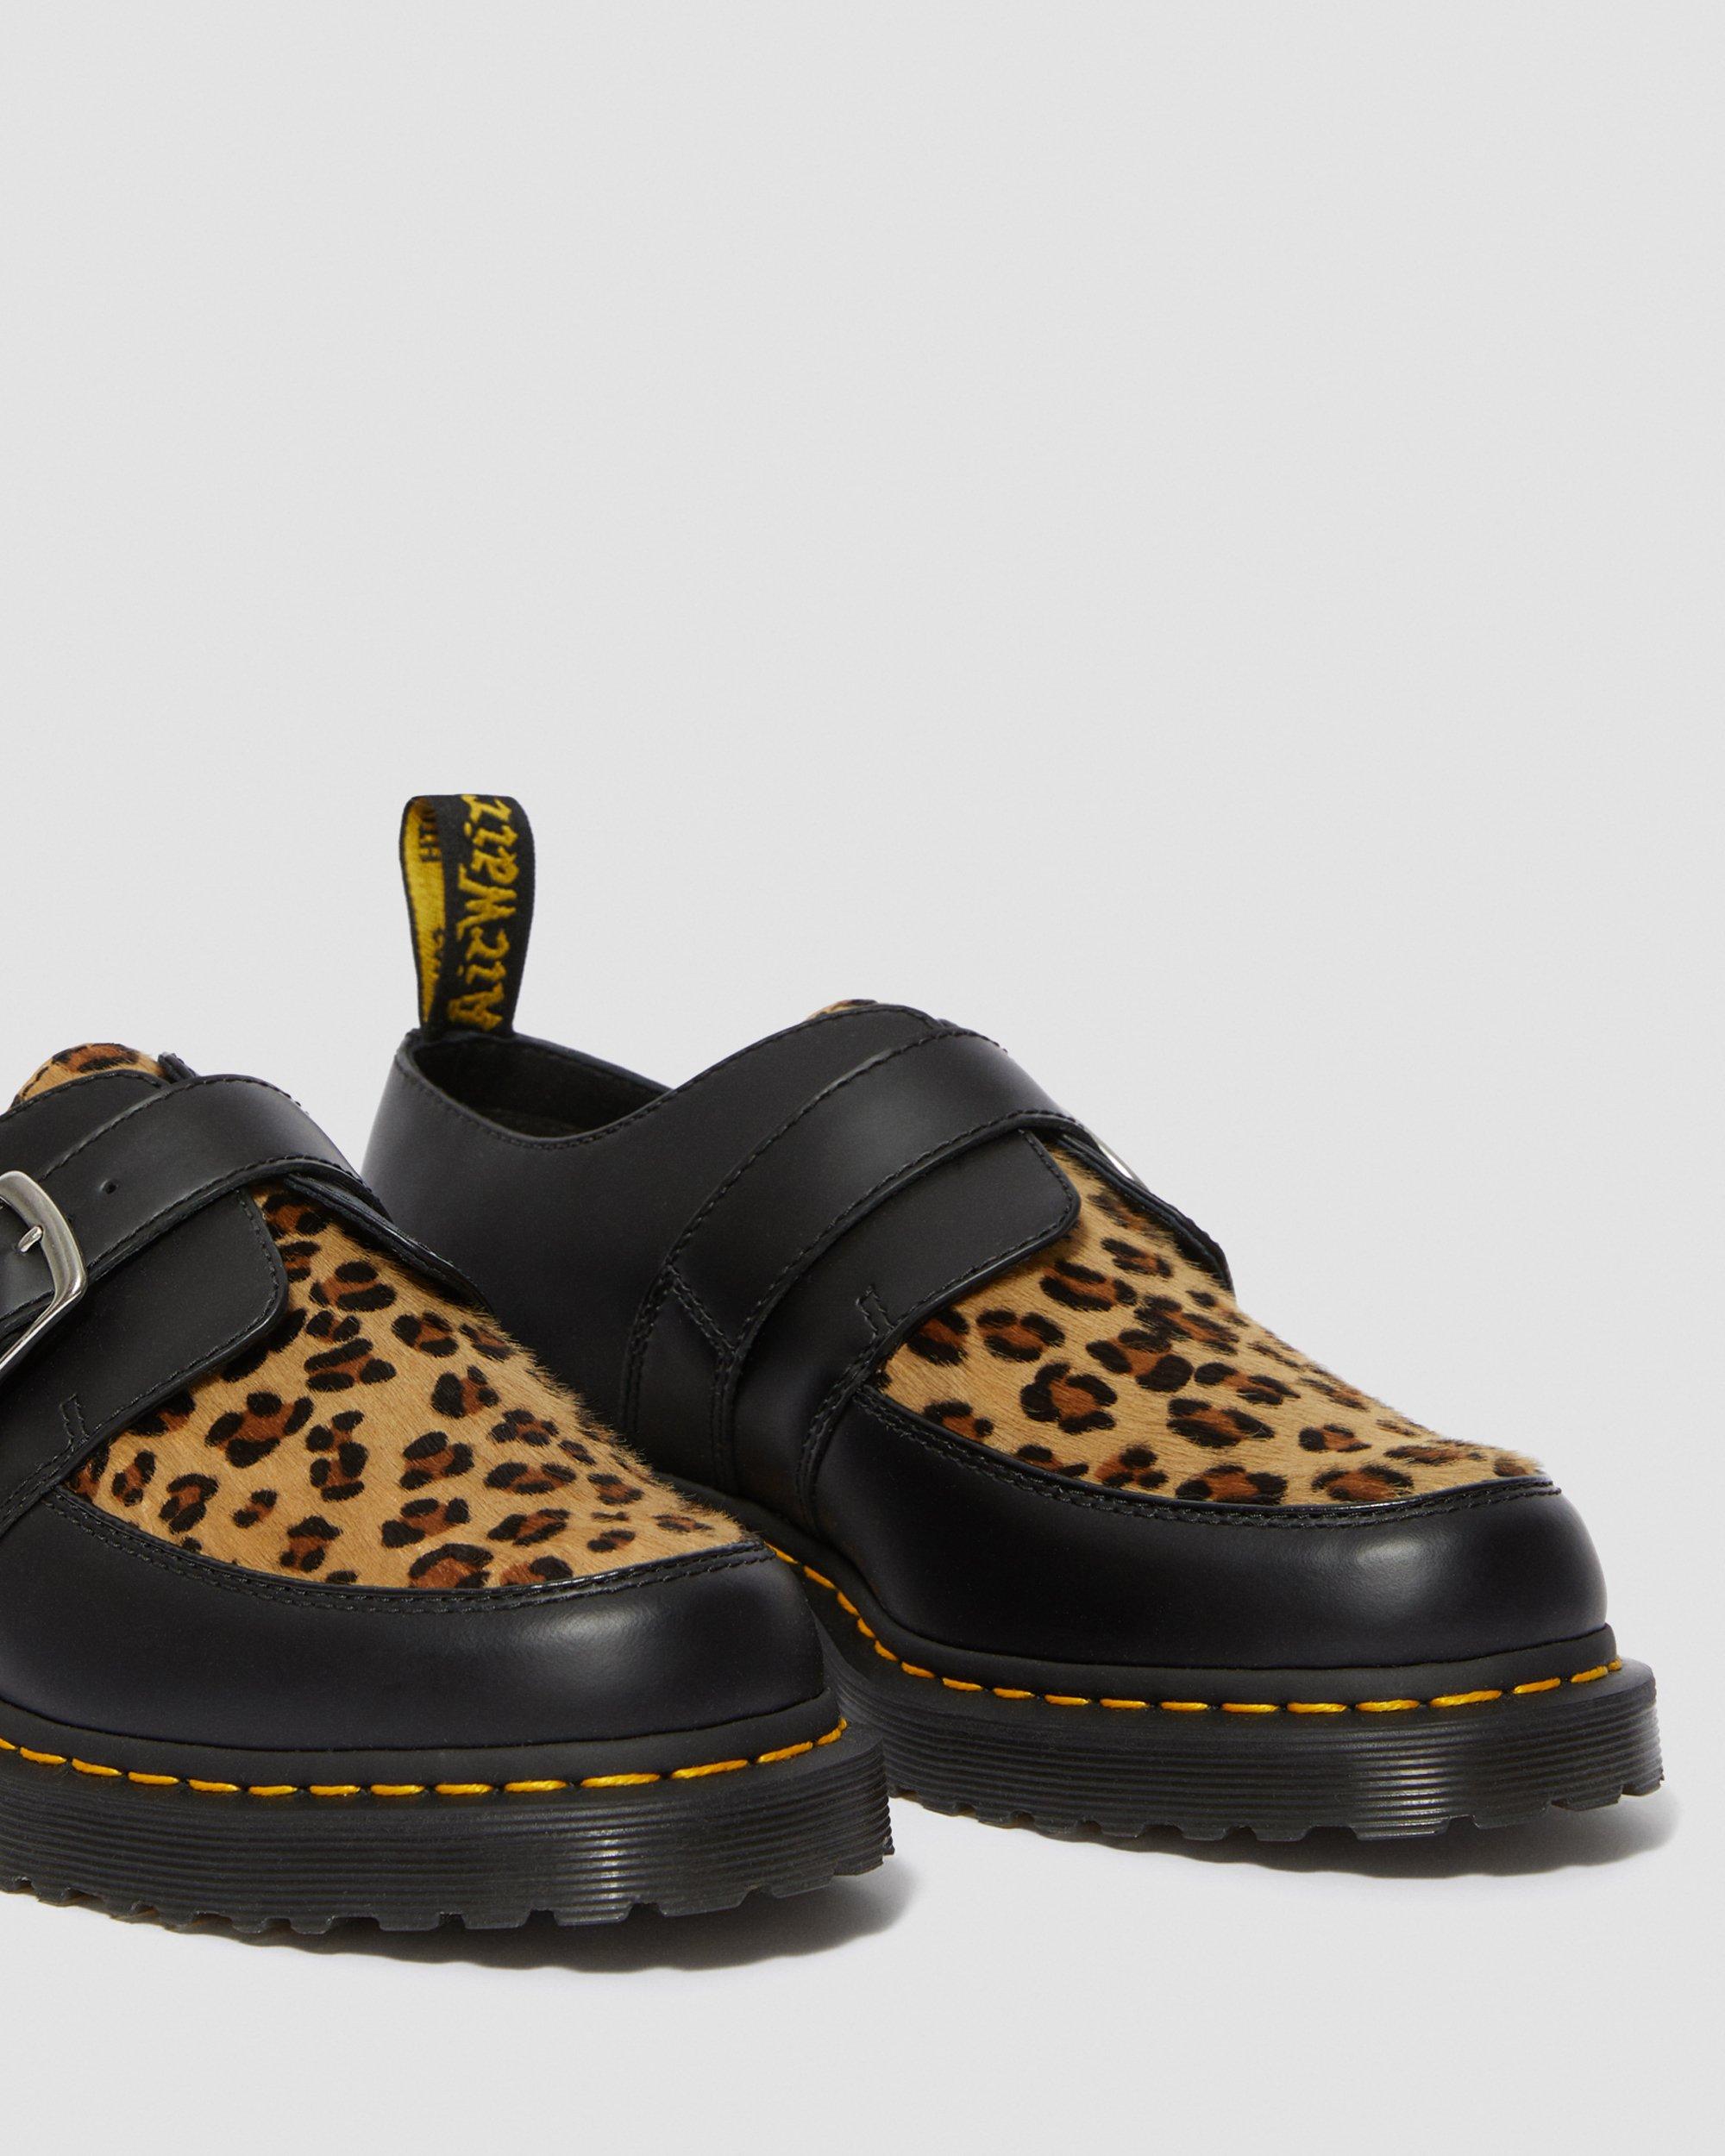 RAMSEY MONK SMOOTH LEATHER CREEPER SHOES | Dr. Martens